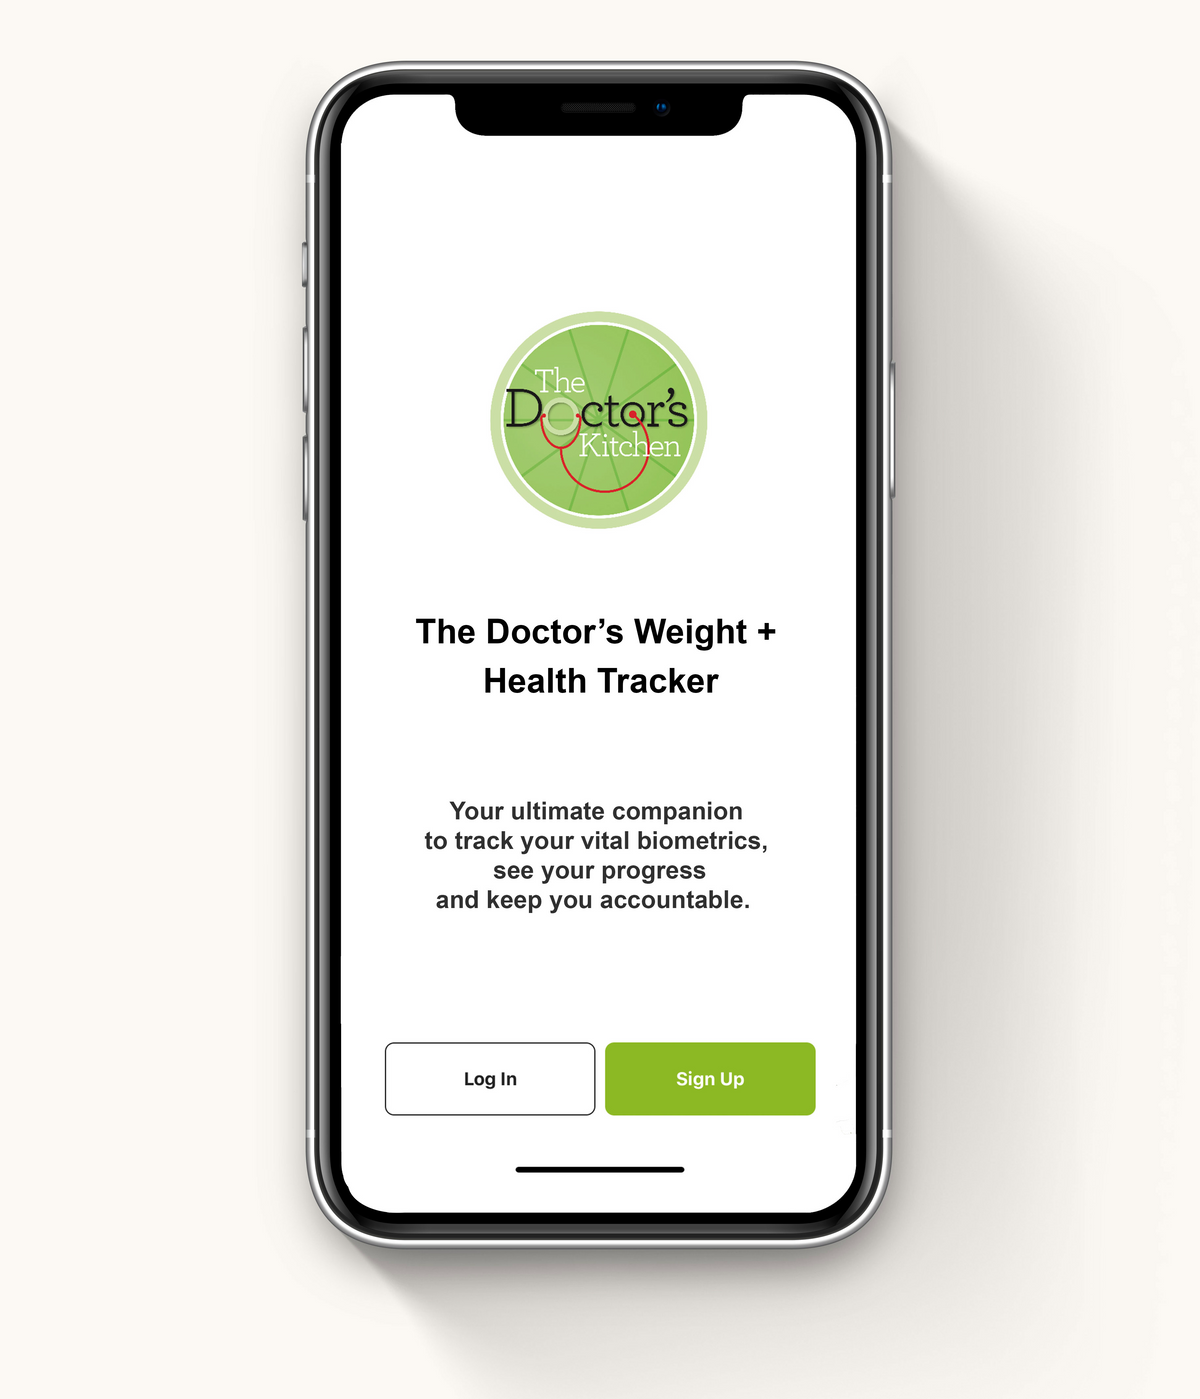 The Doctor's Kitchen Australia launches weight and health tracker app